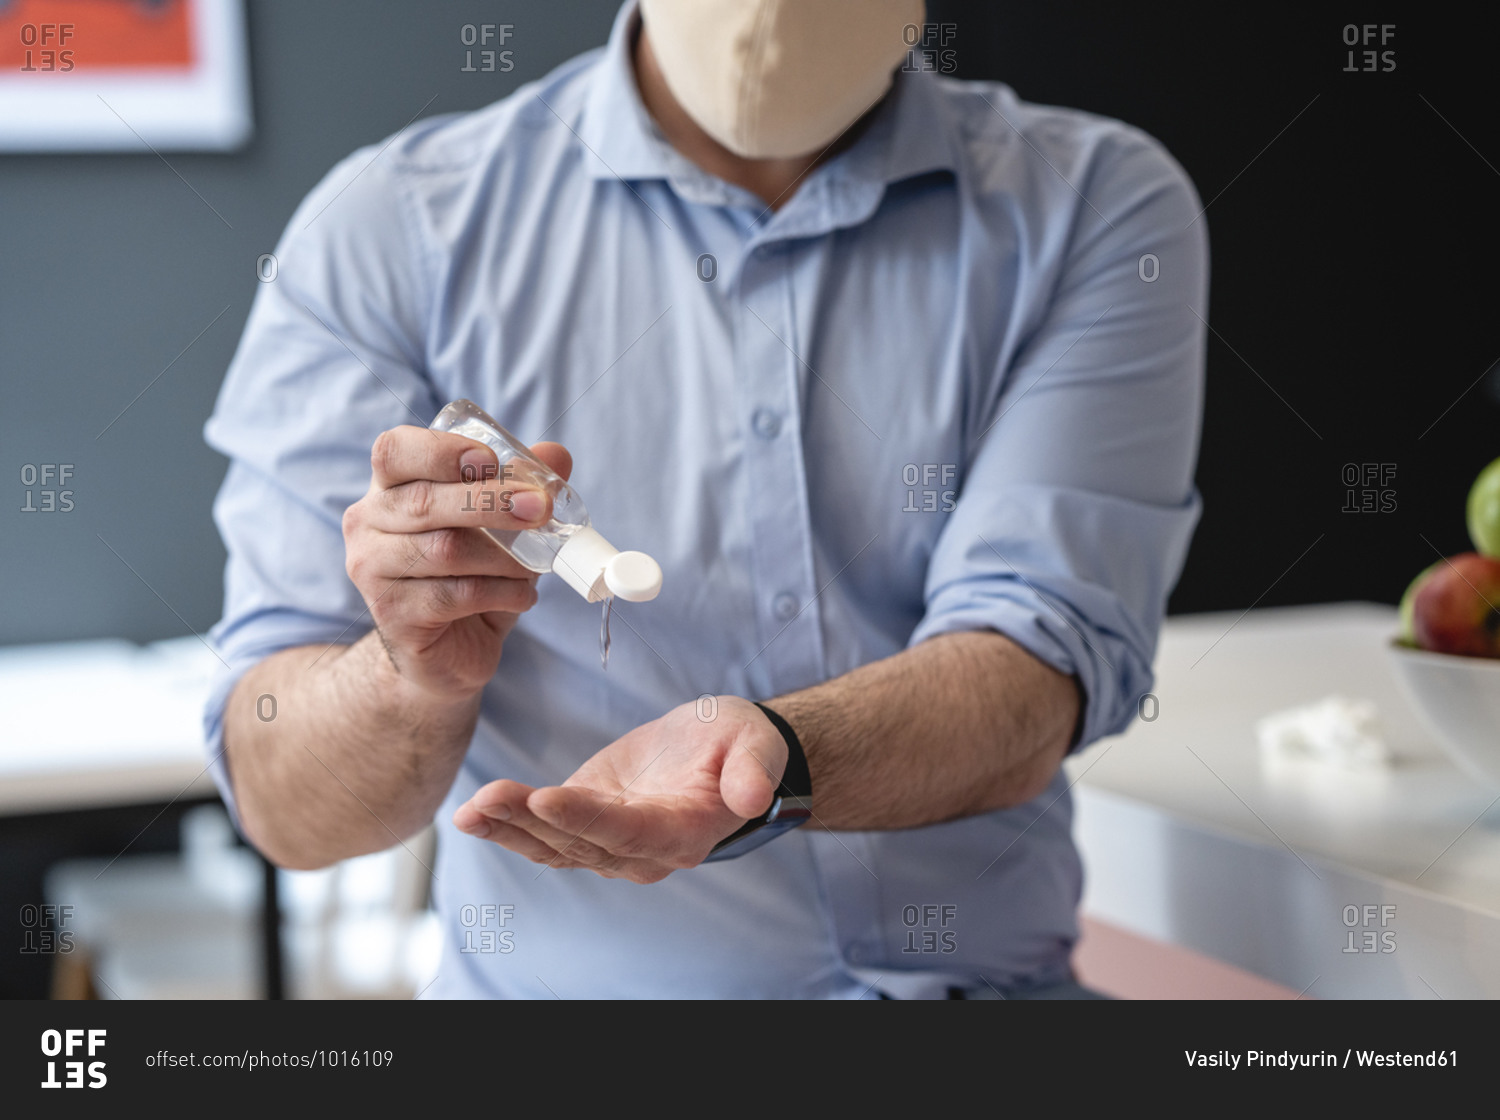 Businessman using hand sanitizer for disinfection at creative office cafeteria